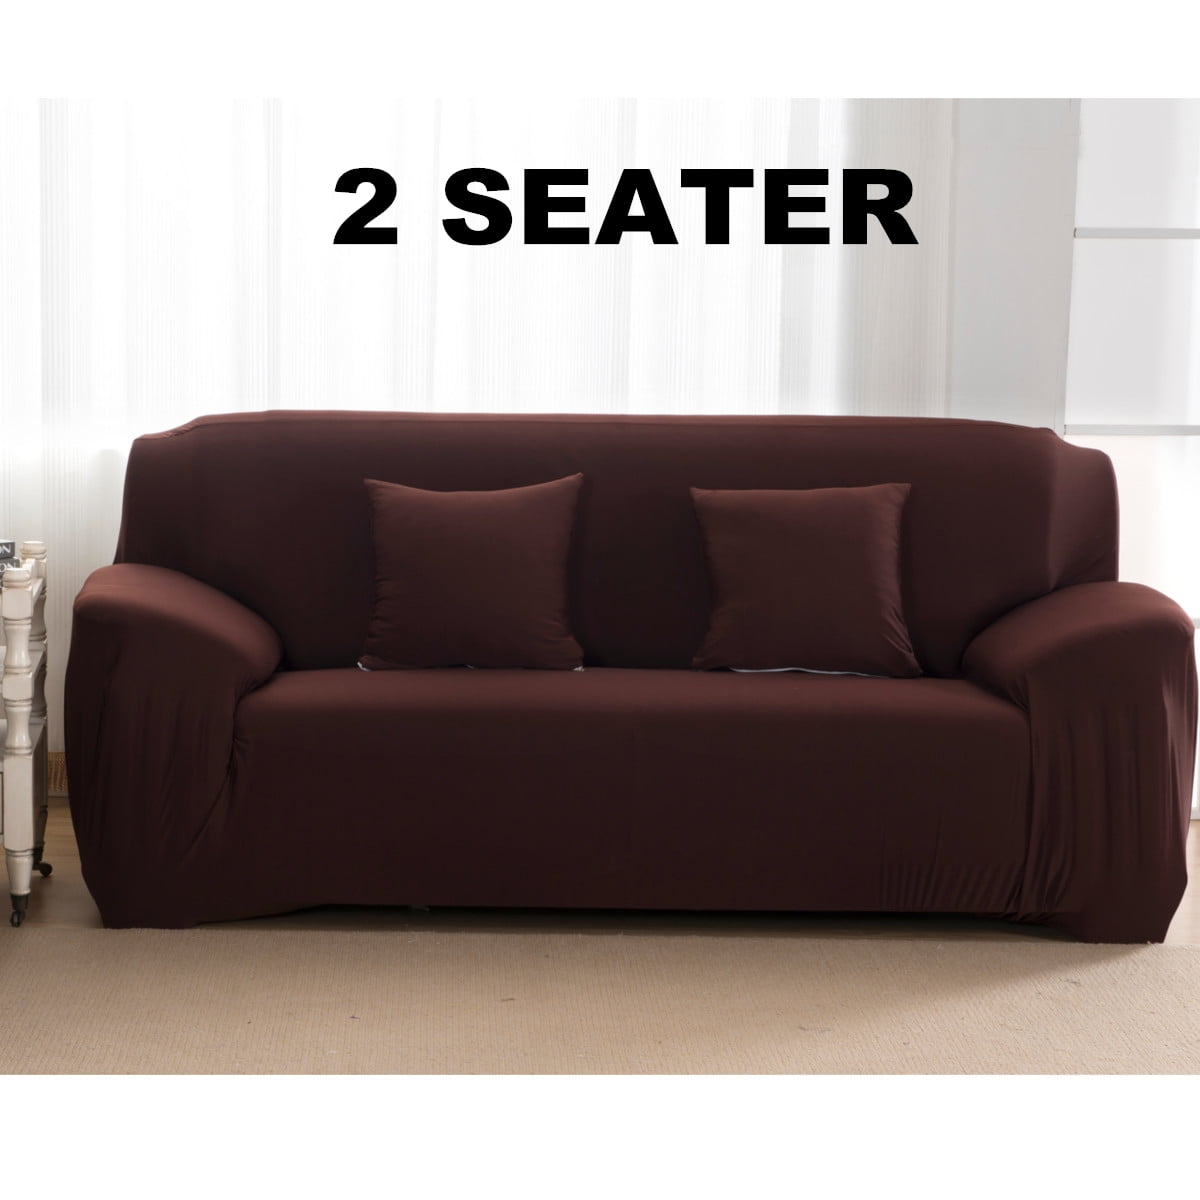 Details about   Various Types Sofa Covers Washable Stretch Cover Slipcover Stretch Set 1-4 Seats 